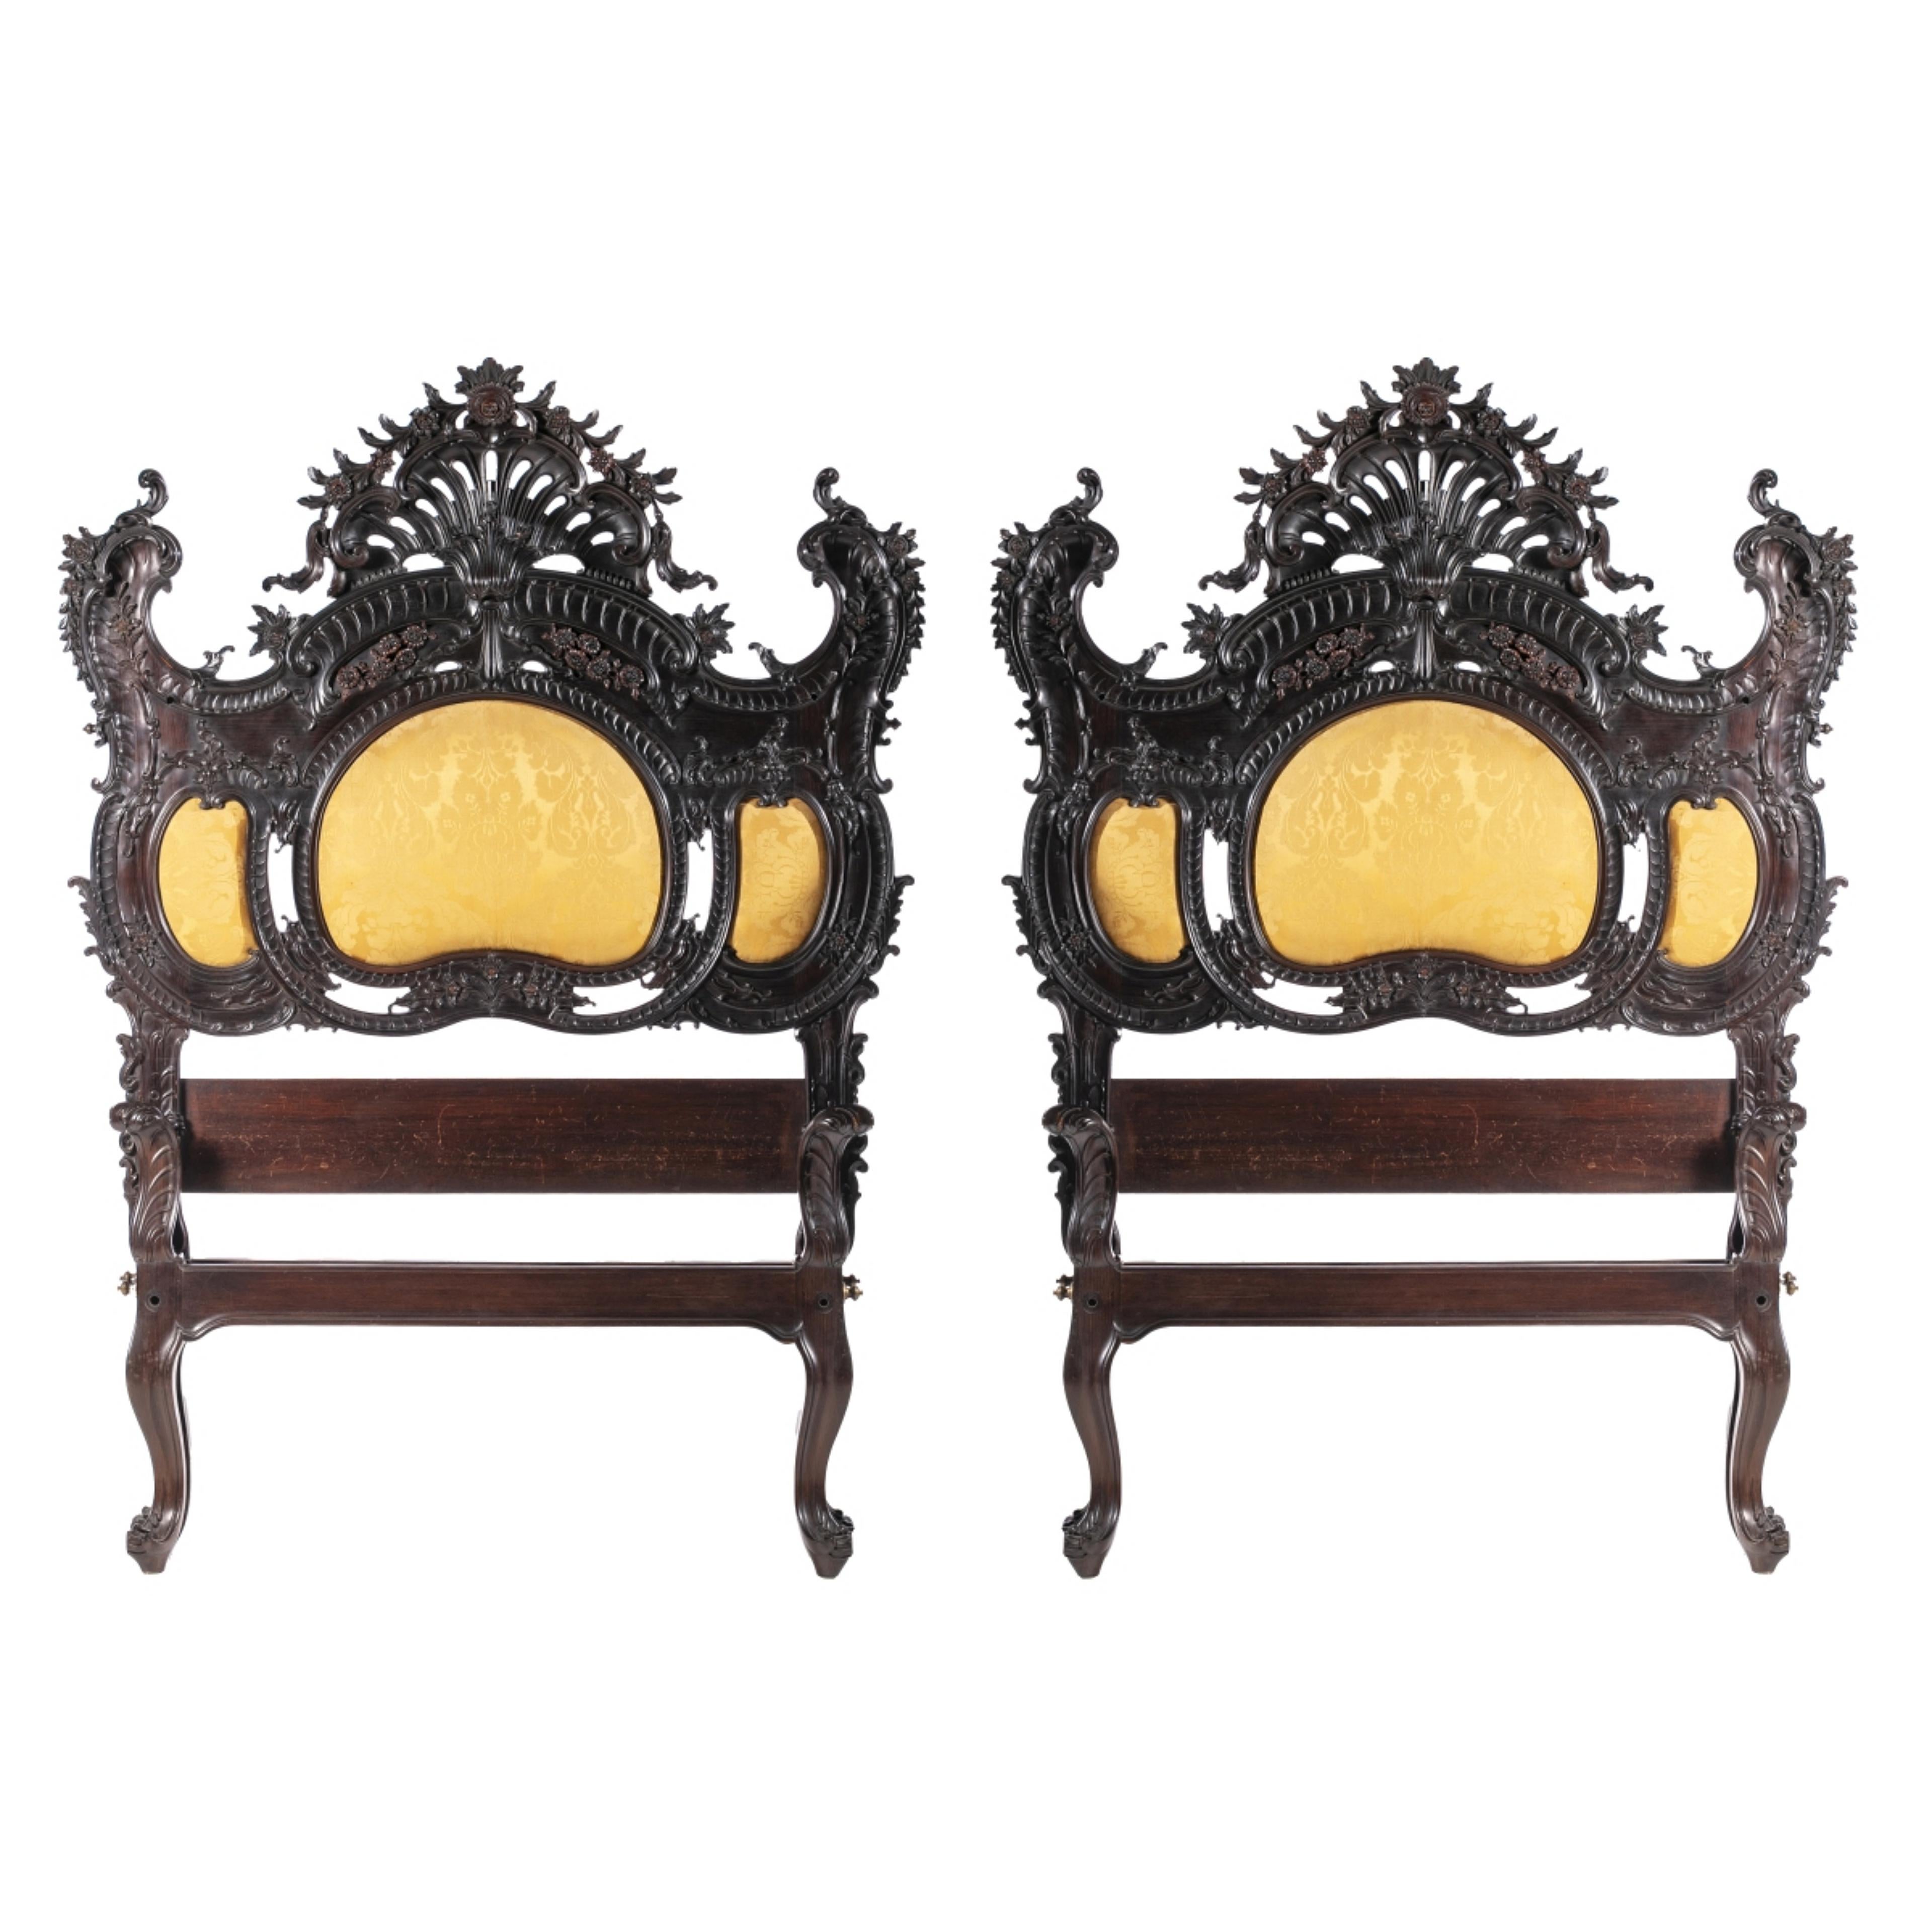 Hand-Crafted SPECTACULAR PAIR OF PORTUGUESE STYLE BEDS early 19th Century For Sale